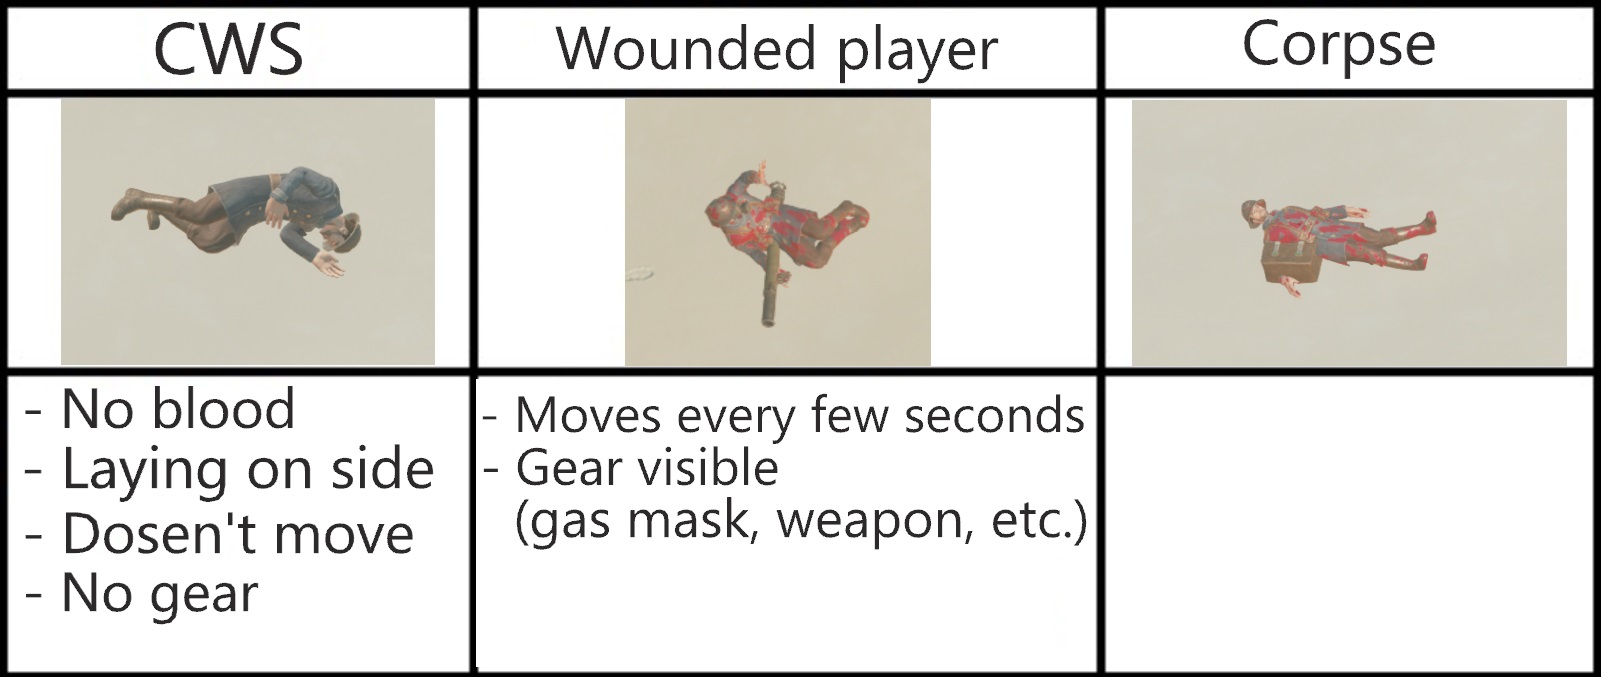 A Critically Wounded Soldier compared to a Wounded Player and a corpse